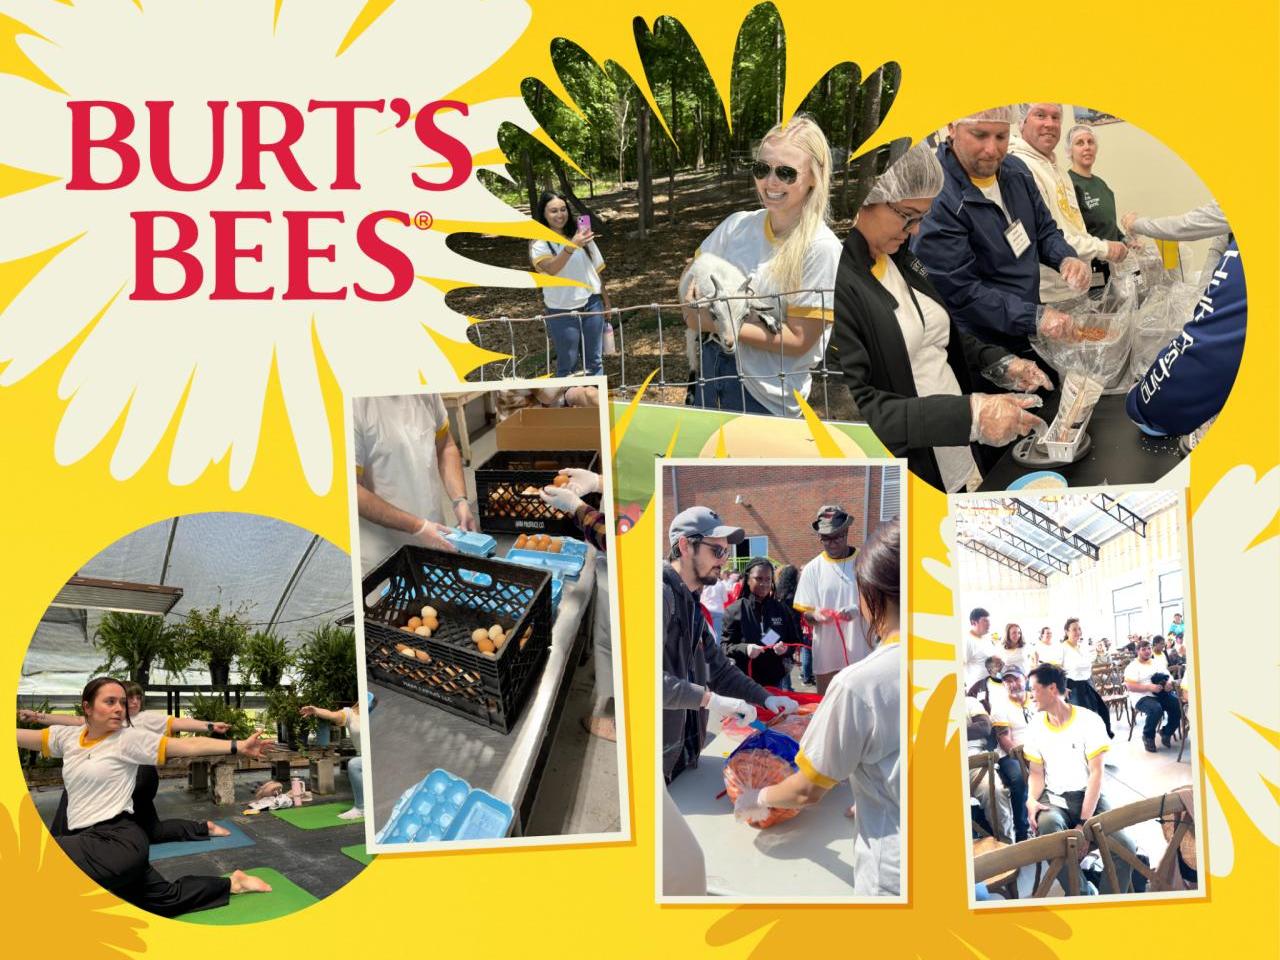 "Burt's Bees" and a collage of people doing volunteer work, yoga, and meeting together.